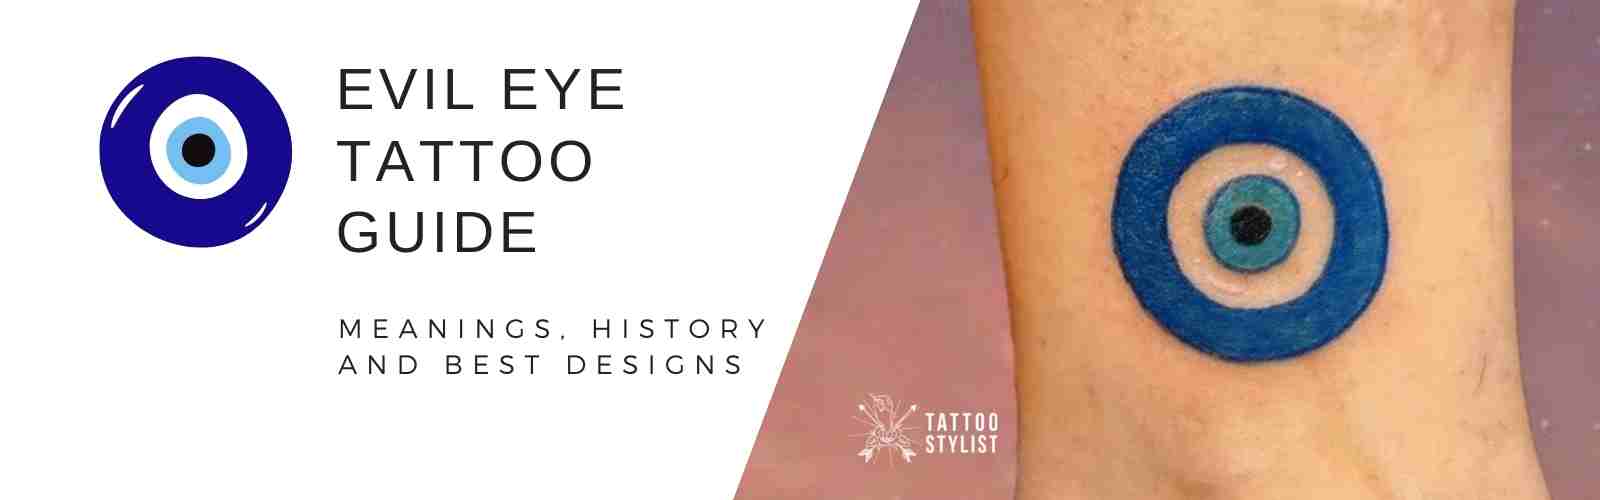 Protective Charm Nazar Evil Eye Tattoo Guide (With Meanings) - Tattoo Stylist